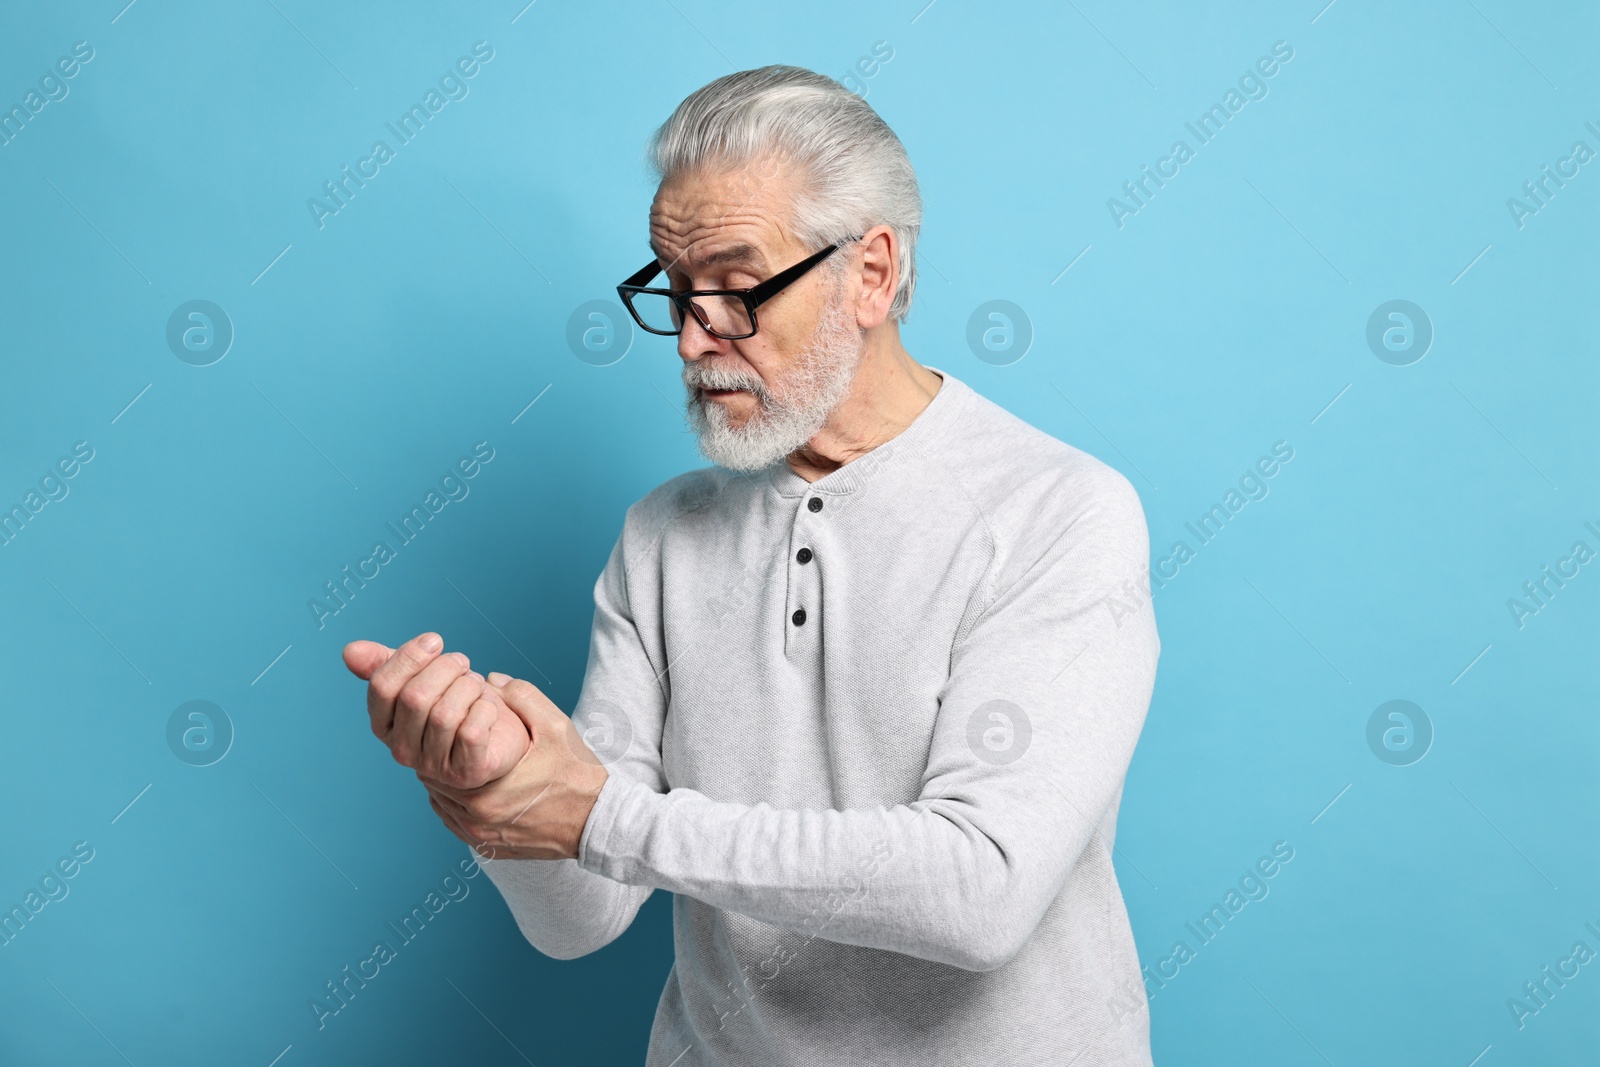 Photo of Arthritis symptoms. Man suffering from pain in wrist on light blue background